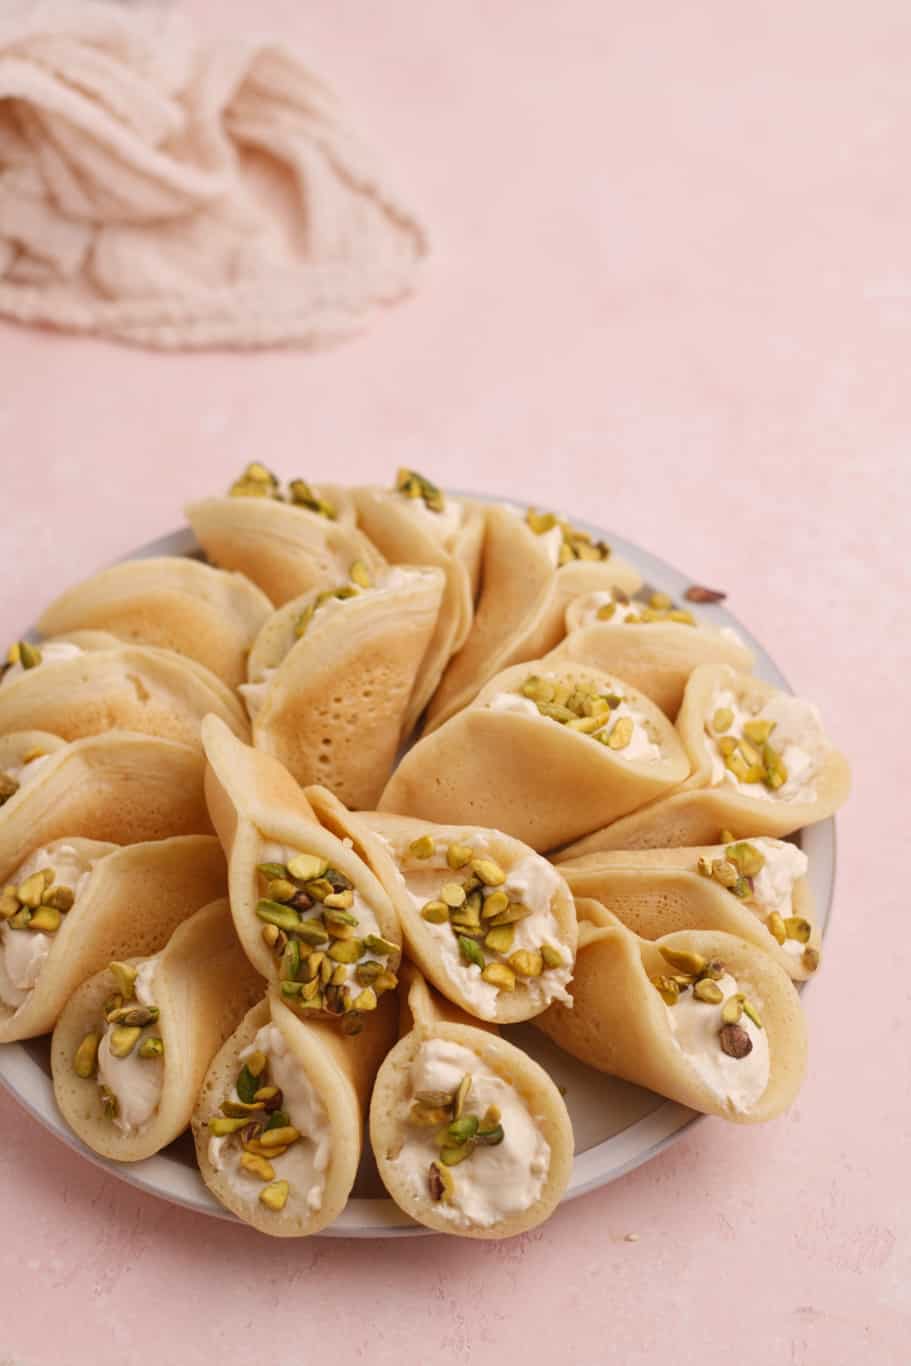 a plate of atayef pancake filled with clotted ashta cream and topped with crushed pistachios ready to be served